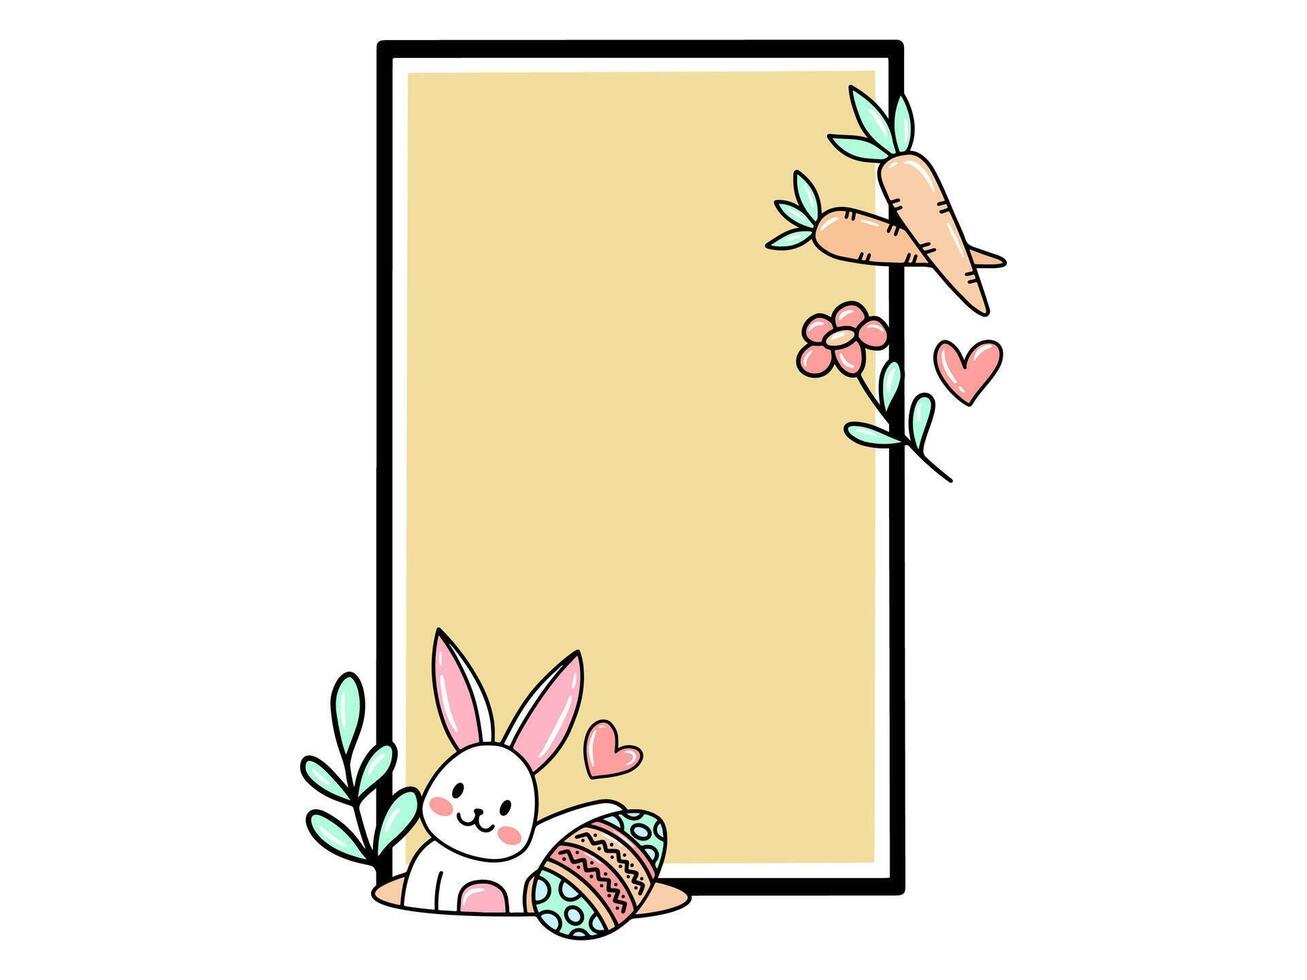 Easter Eggs and Bunnies Frame Background vector